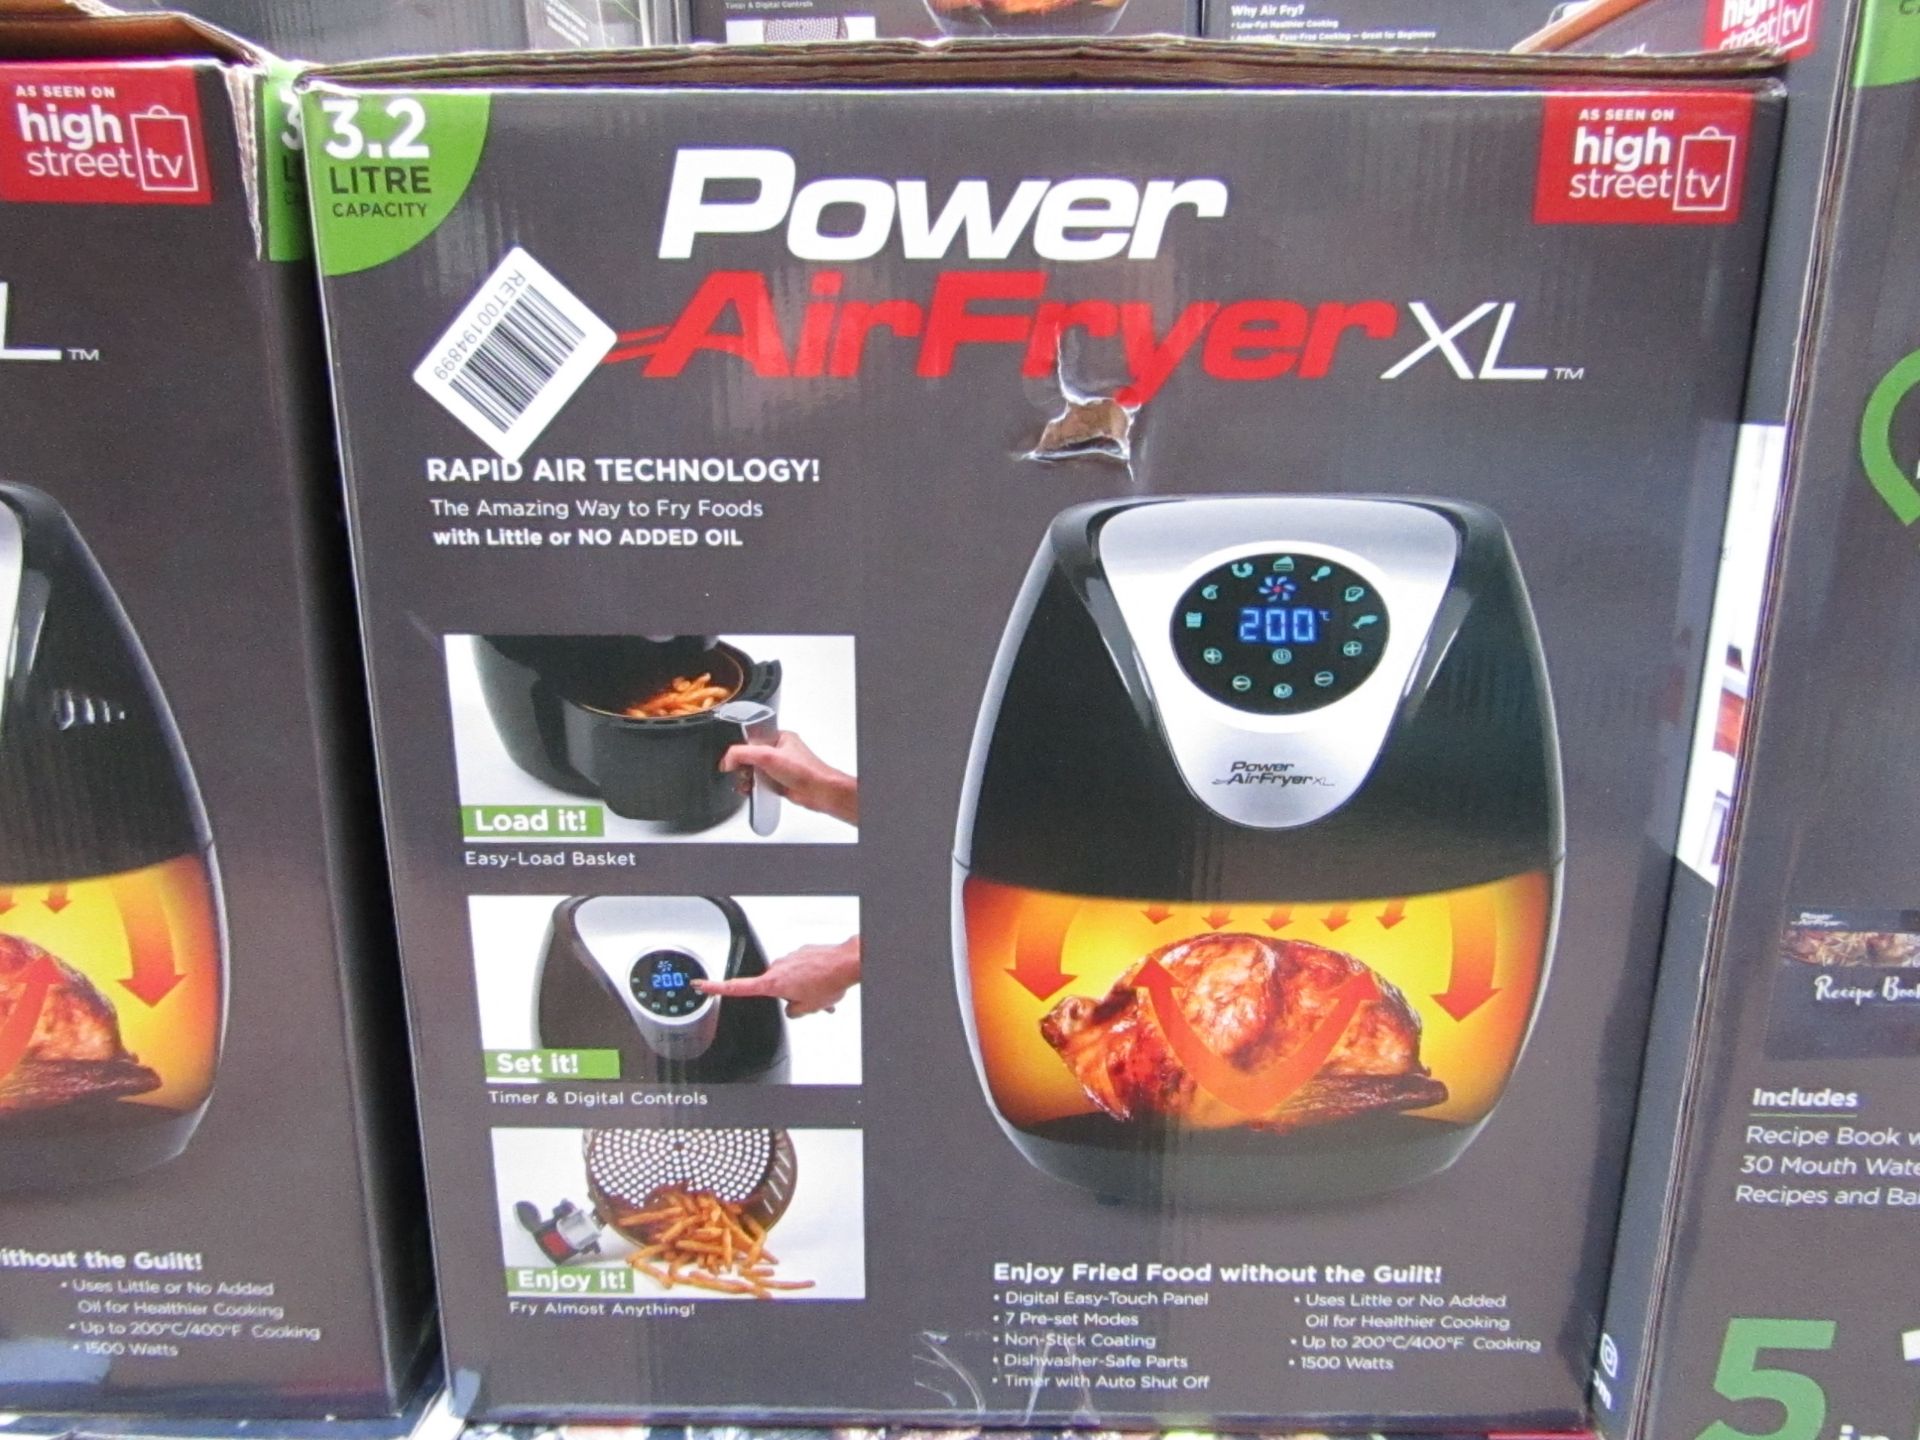 | 1x | power air fryer 3.2L | unchecked and boxed | no online re-sale | Sku C5060191469838 | RRP £